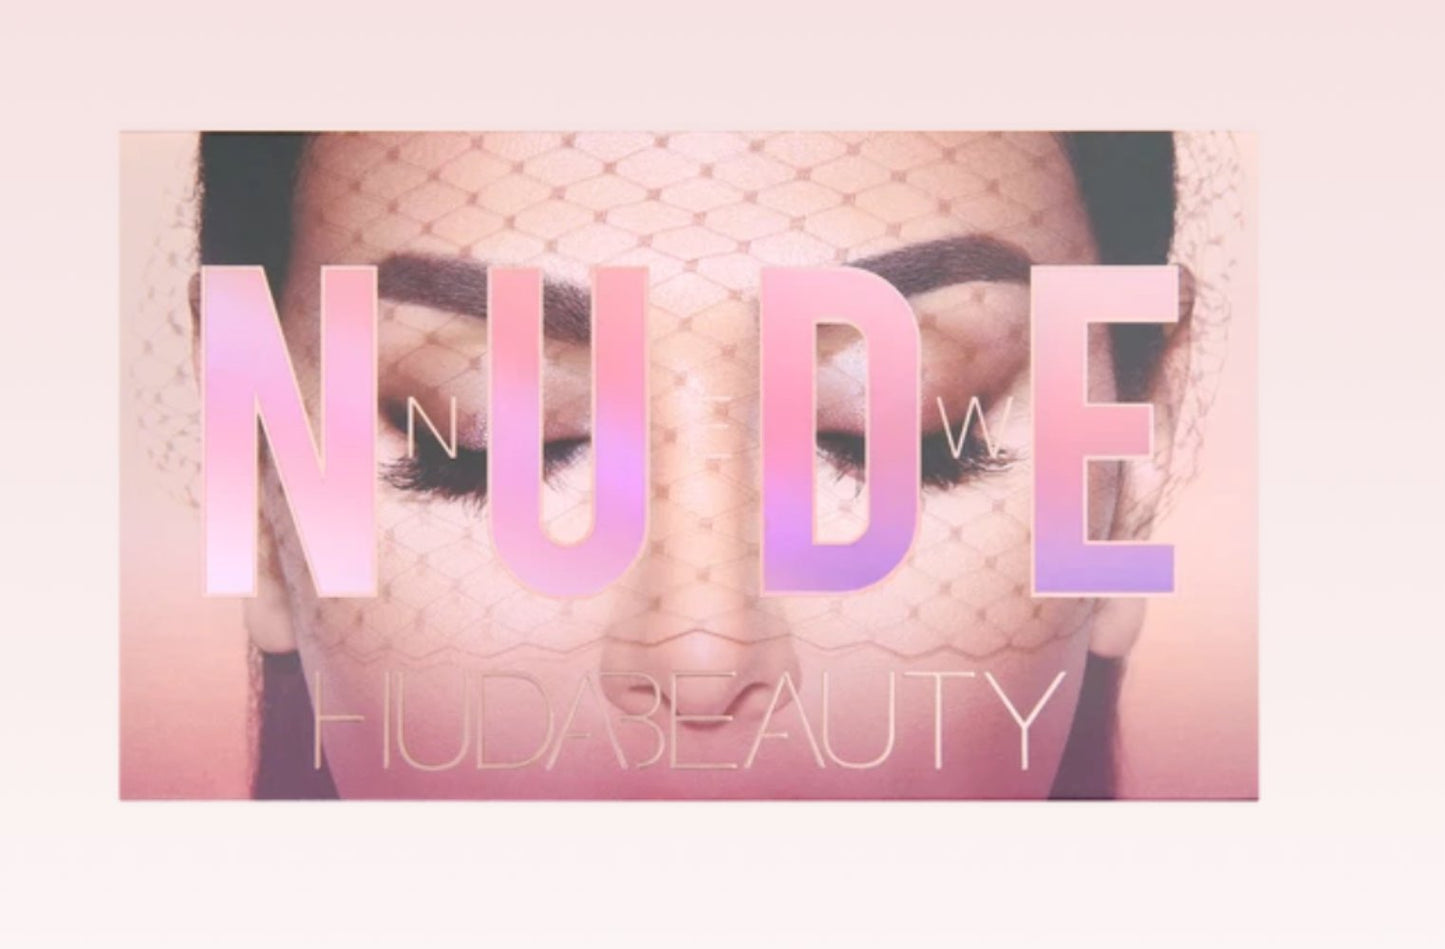 Huda Beauty The New Nude Eyeshadow Palette - The Face Method